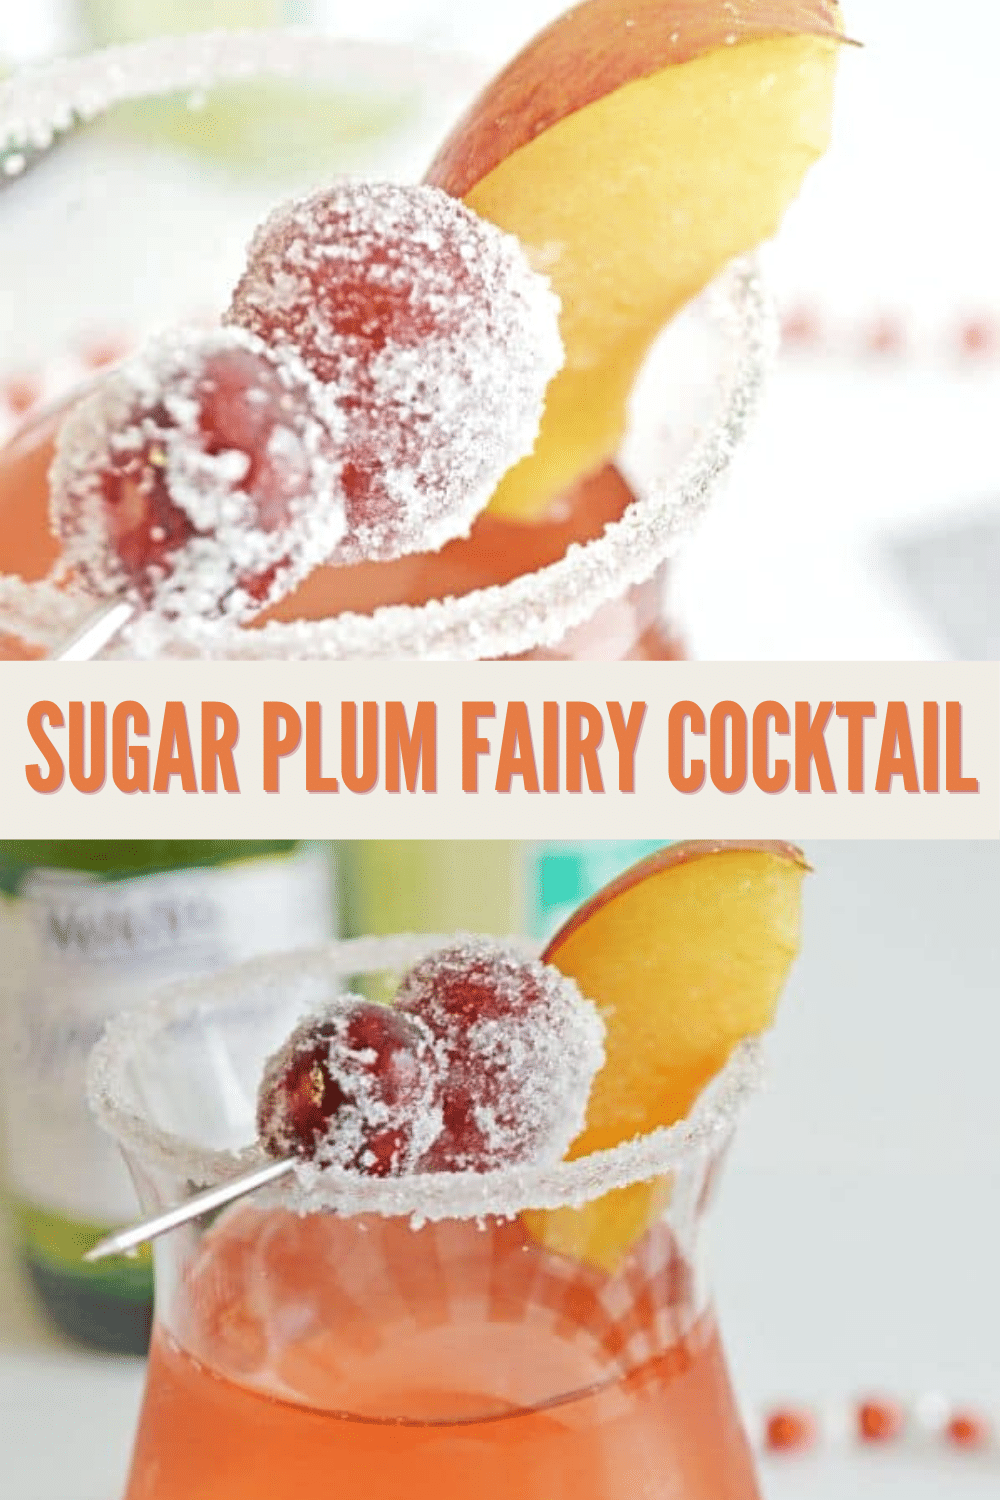 This sugar plum fairy cocktail is not only pretty to look at, it's super yummy! This is the perfect cocktail to serve at a holiday party and it's really easy to make. #nutcracker #cocktails #partydrinks via @wondermomwannab